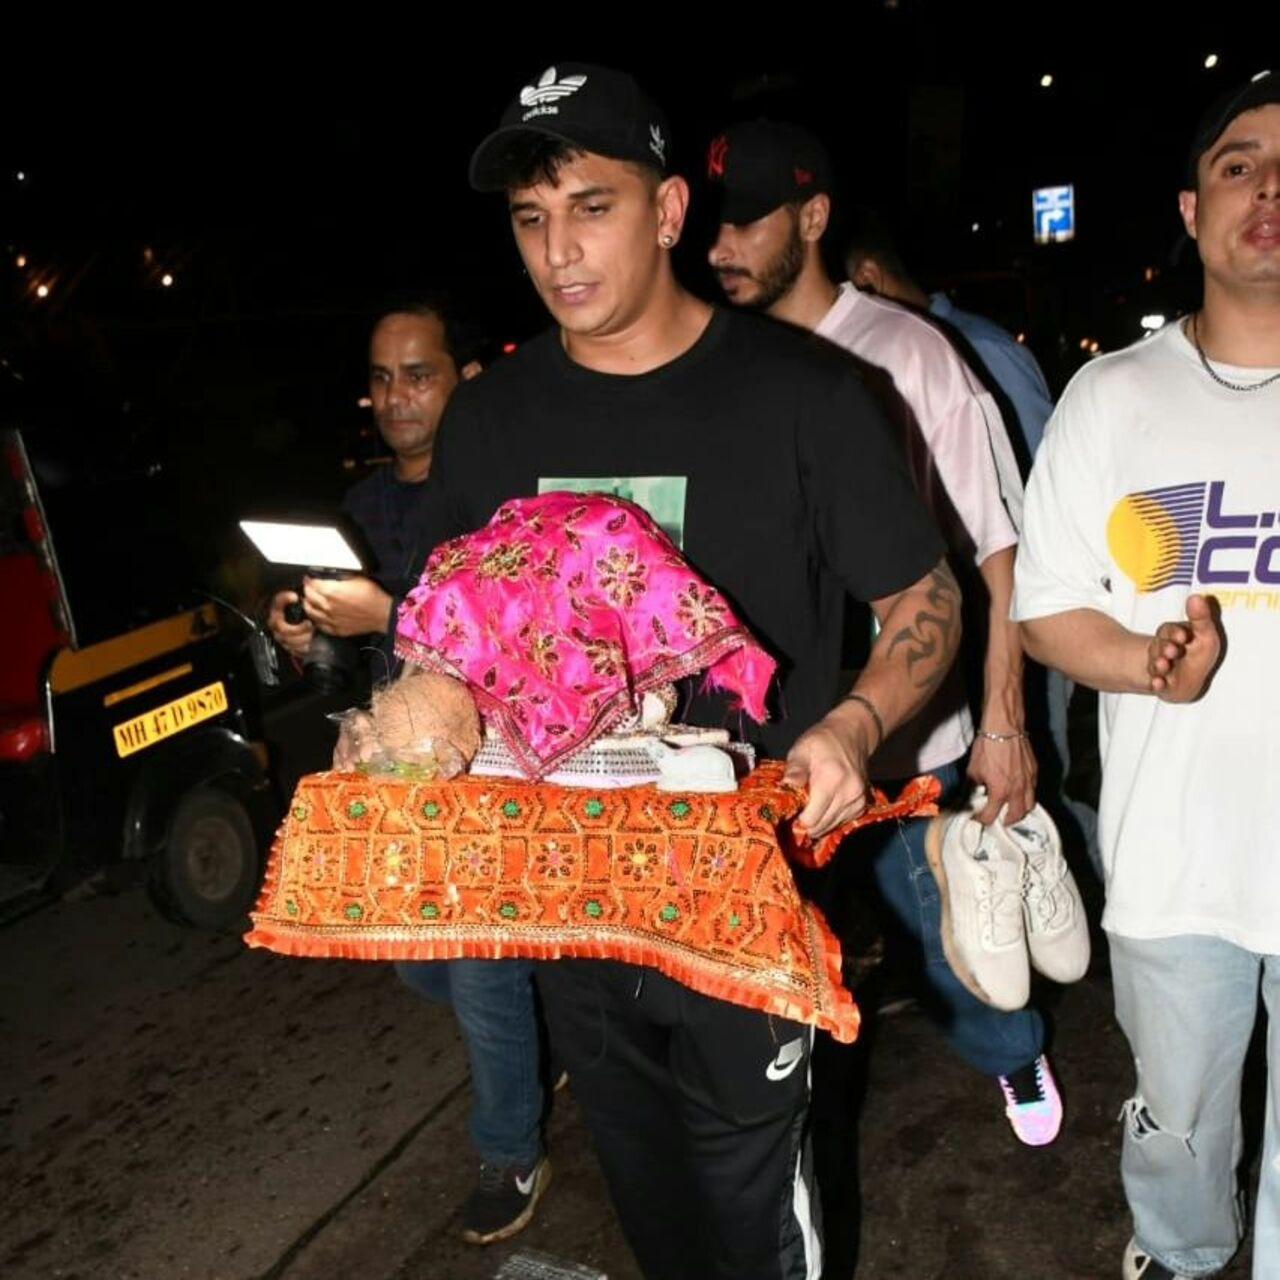 Prince Narula was spotted heading home with a Ganesh murthi